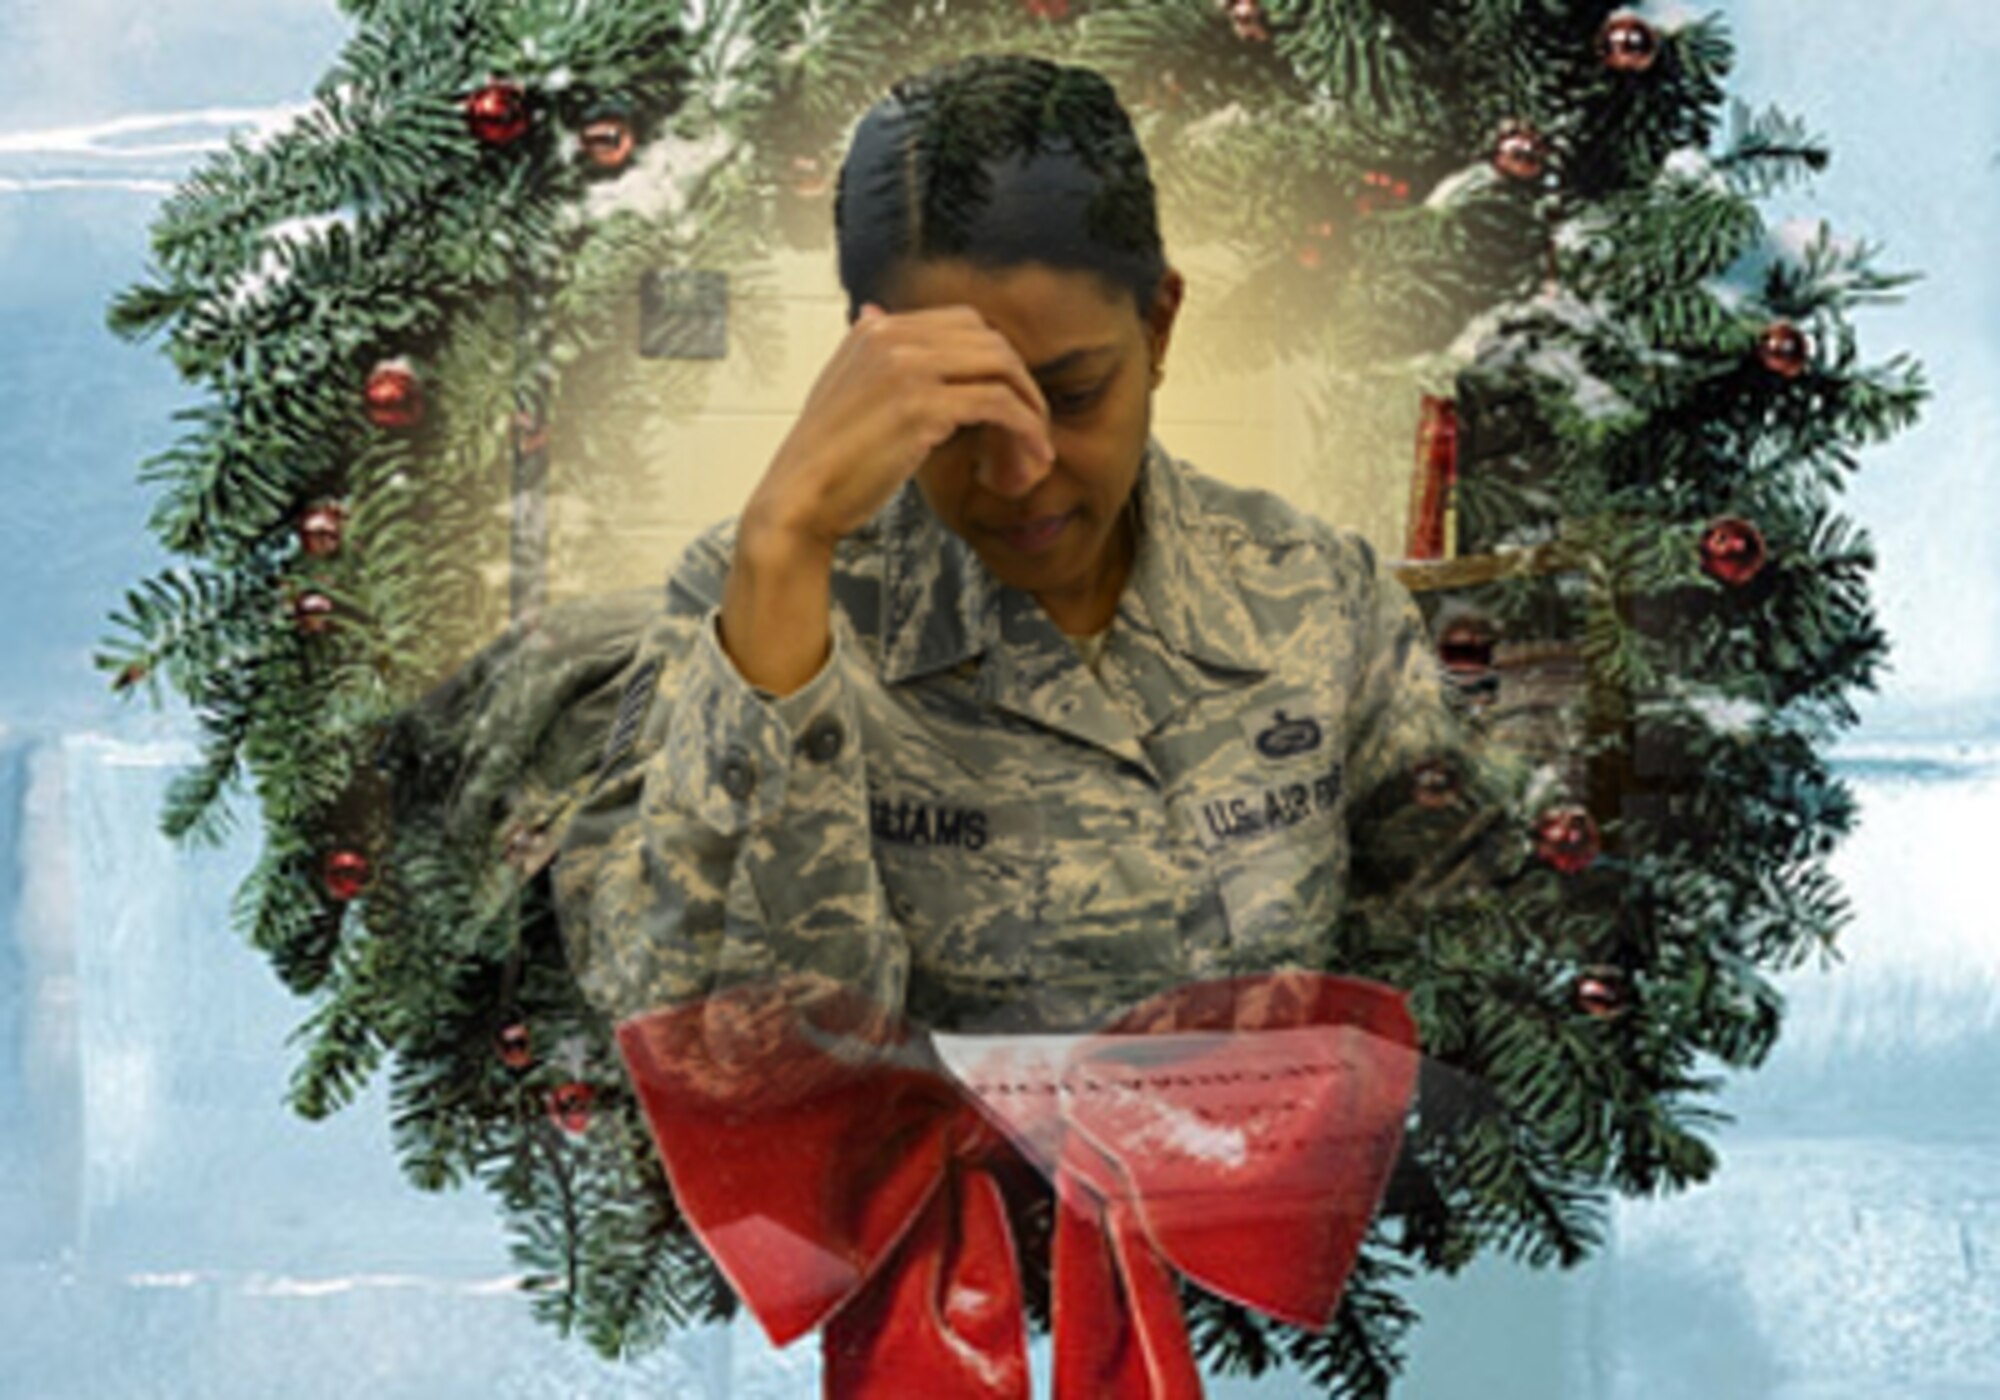 Though Tech Sgt. Sonja Williams, 94th Airlift Wing Airman and Family Readiness specialist, simulates a depressed Airman, holiday depression is real. During this time of the year, people may experience heightened stress, fatigue, financial constraints and loneliness triggered by the holiday season. TriCare members may contact Behavioral Health Care at 1-800-700-8646. Additionally, if you are in urgent need, you can call Military OneSource at 1-800-342-9647 and speak to counselor on the phone, or set up free counseling in your local area. If you or a loved one is experiencing suicidal thoughts, please contact 1-800-SUICIDE (784-2433) for immediate help. (U.S. Air Force photo illustration/Senior Airman Chelsea Smith)